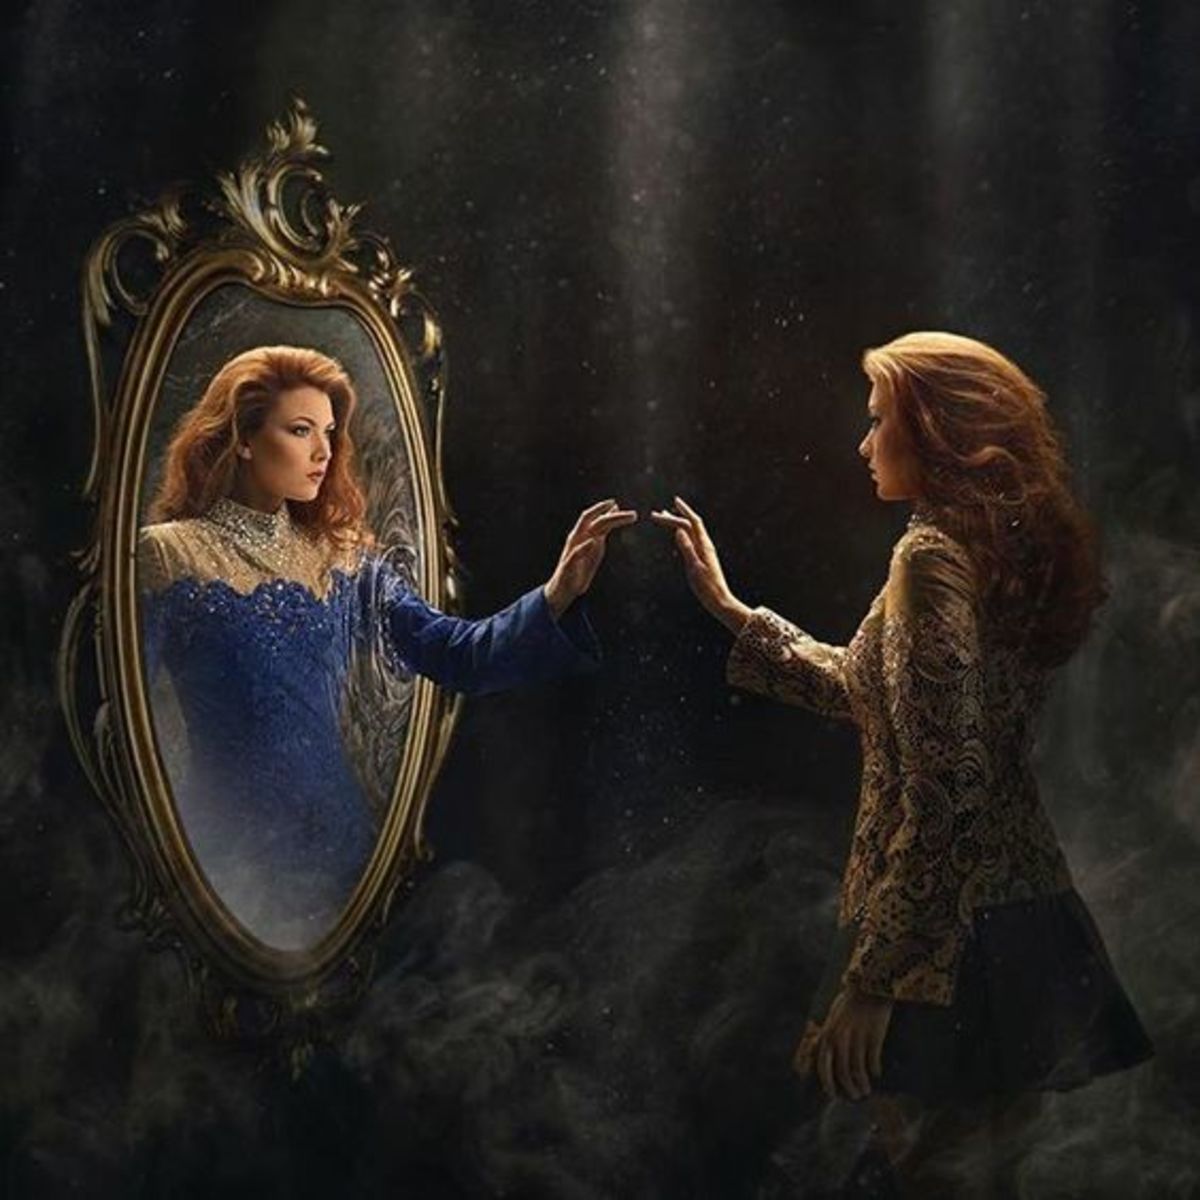 Magic Mirror Tell Me Who Is the Most Beautiful in This World?